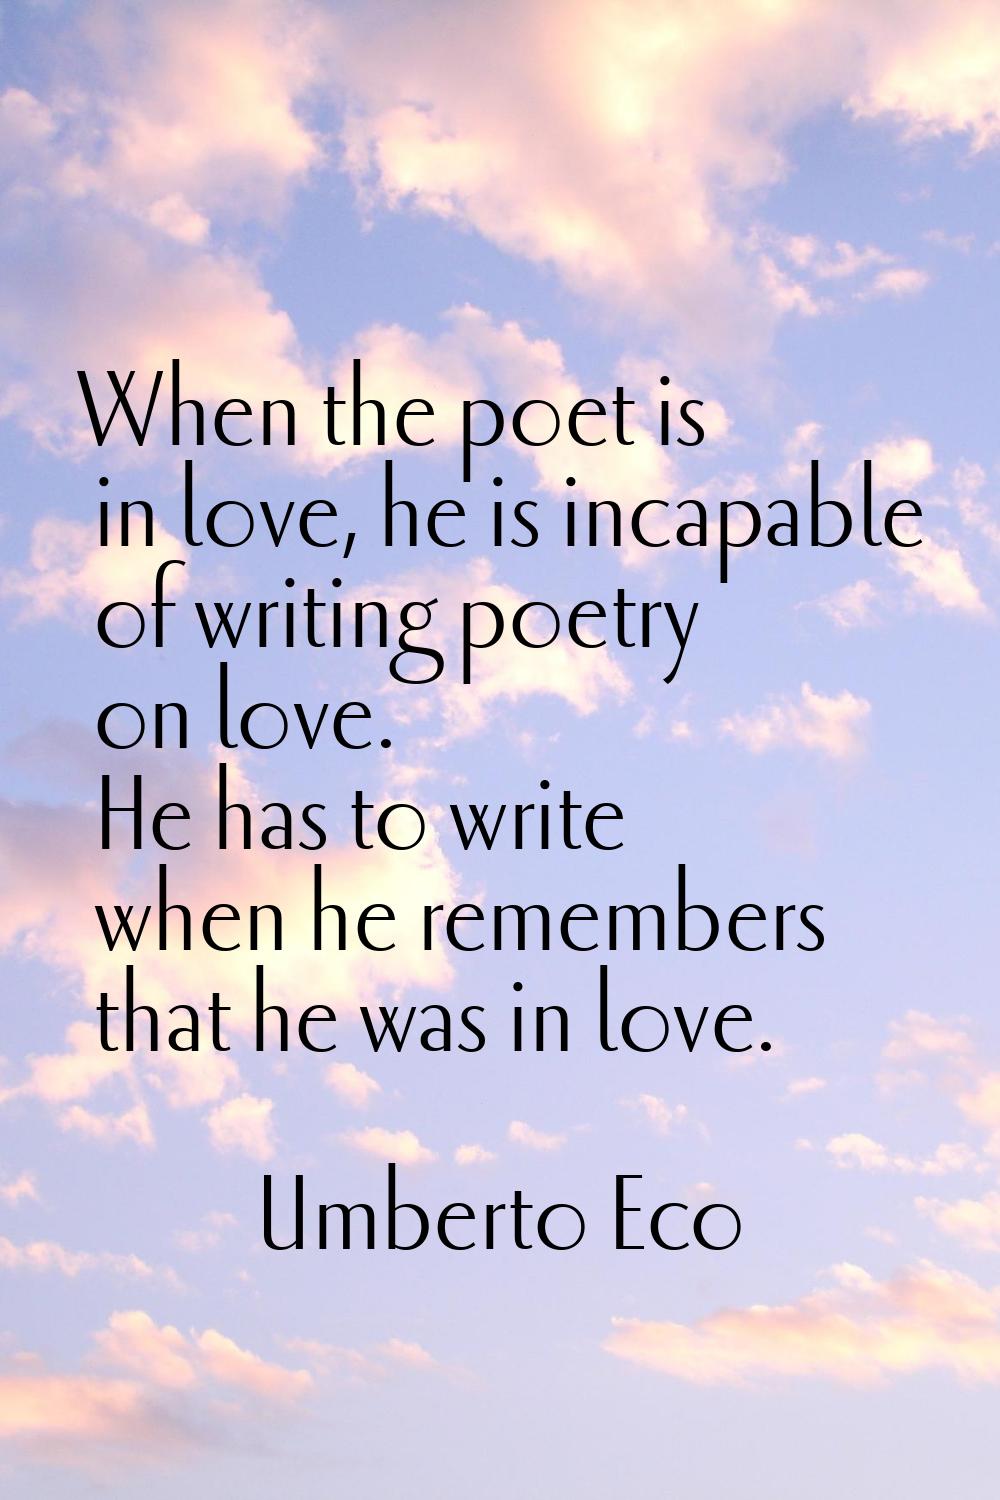 When the poet is in love, he is incapable of writing poetry on love. He has to write when he rememb